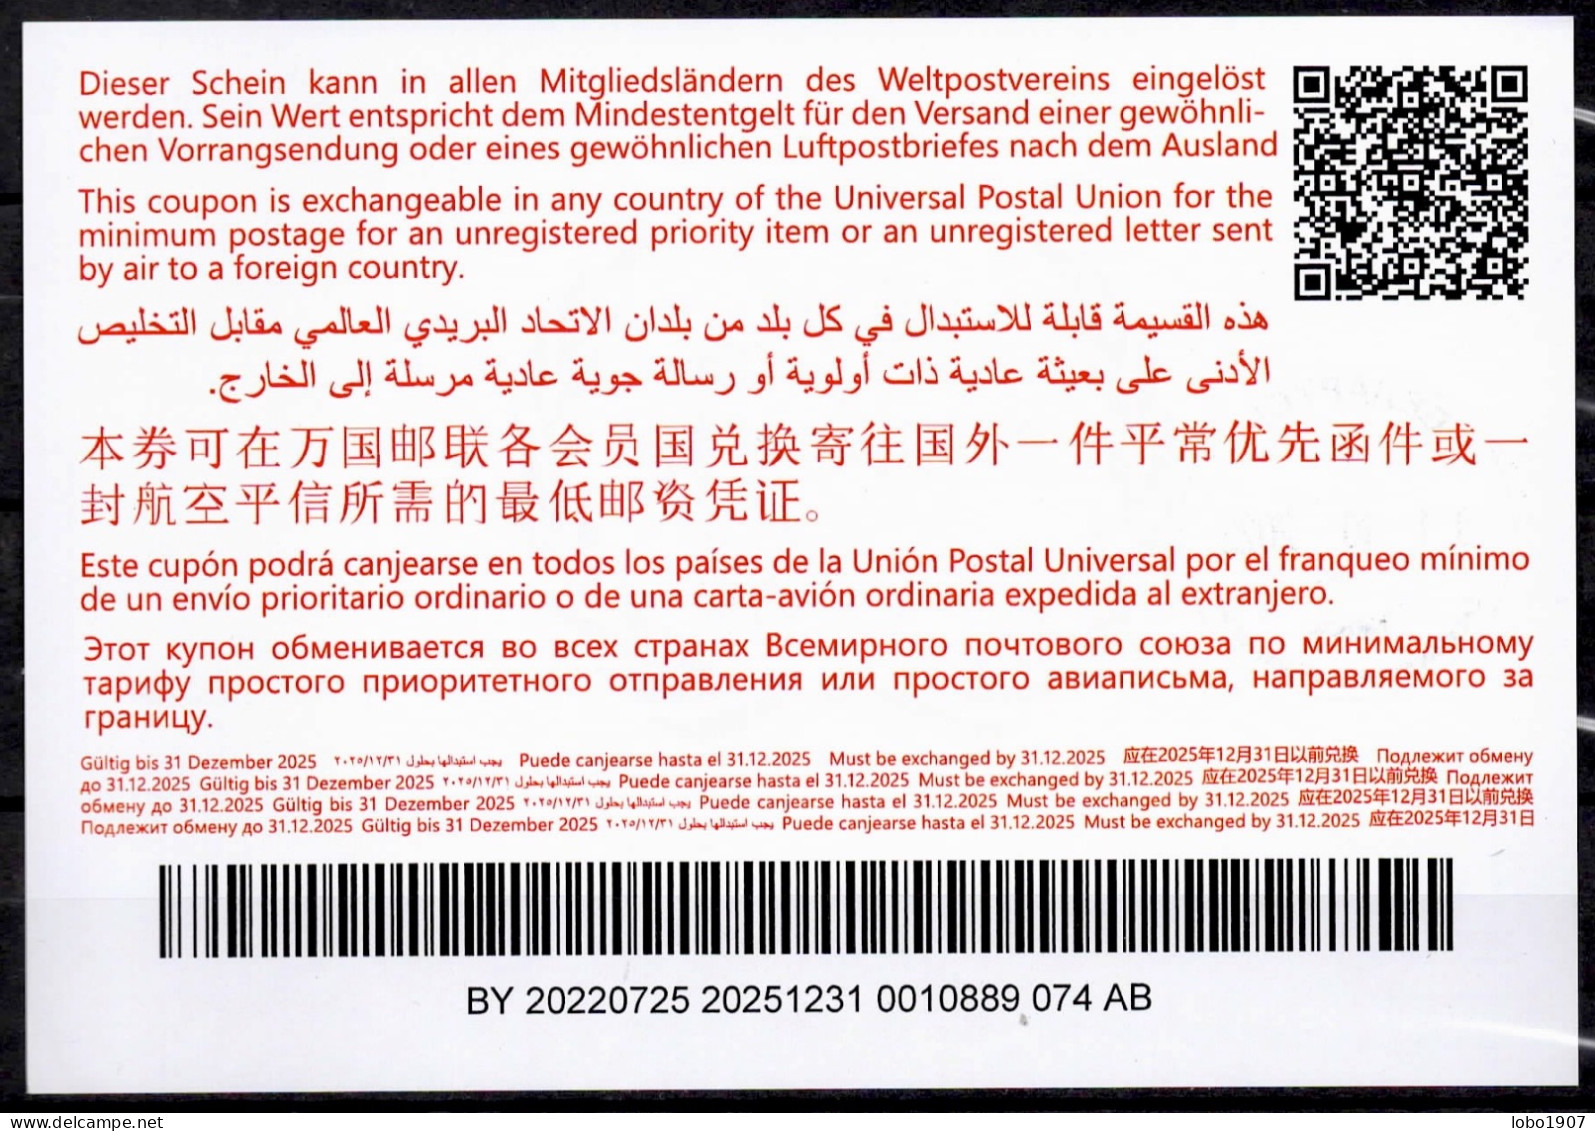 BELARUS  Abidjan Special Issue Ab49  20220725 AB  Int. Reply Coupon Reponse Antwortschein IRC IAS  MINSK 01.10.2022  FD! - Bielorrusia